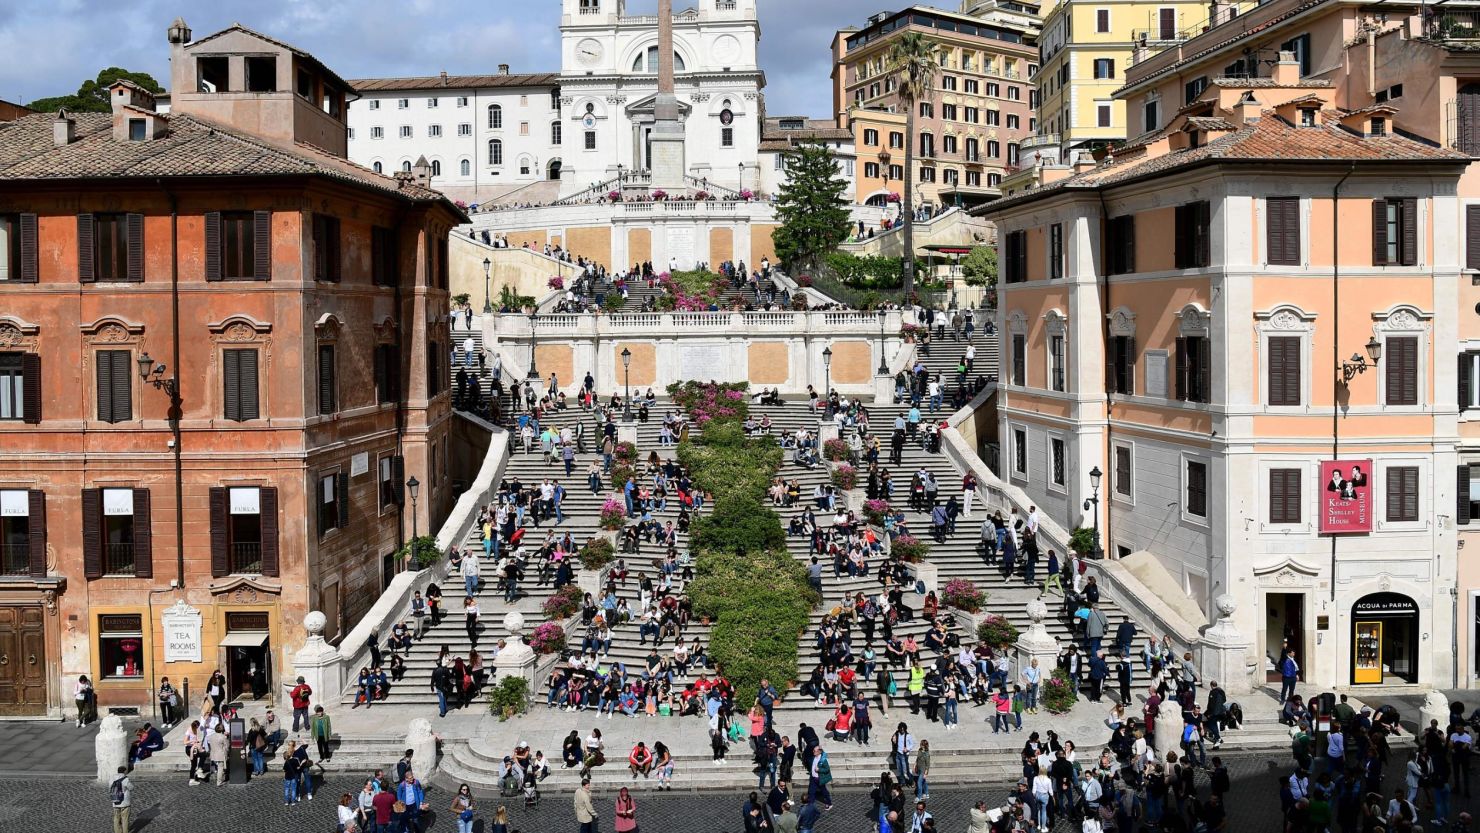 Tourists sit on the Rome's Spanish Steps in Rome on May 4, 2019. (Photo by Vincenzo PINTO / AFP)        (Photo credit should read VINCENZO PINTO/AFP/Getty Images)